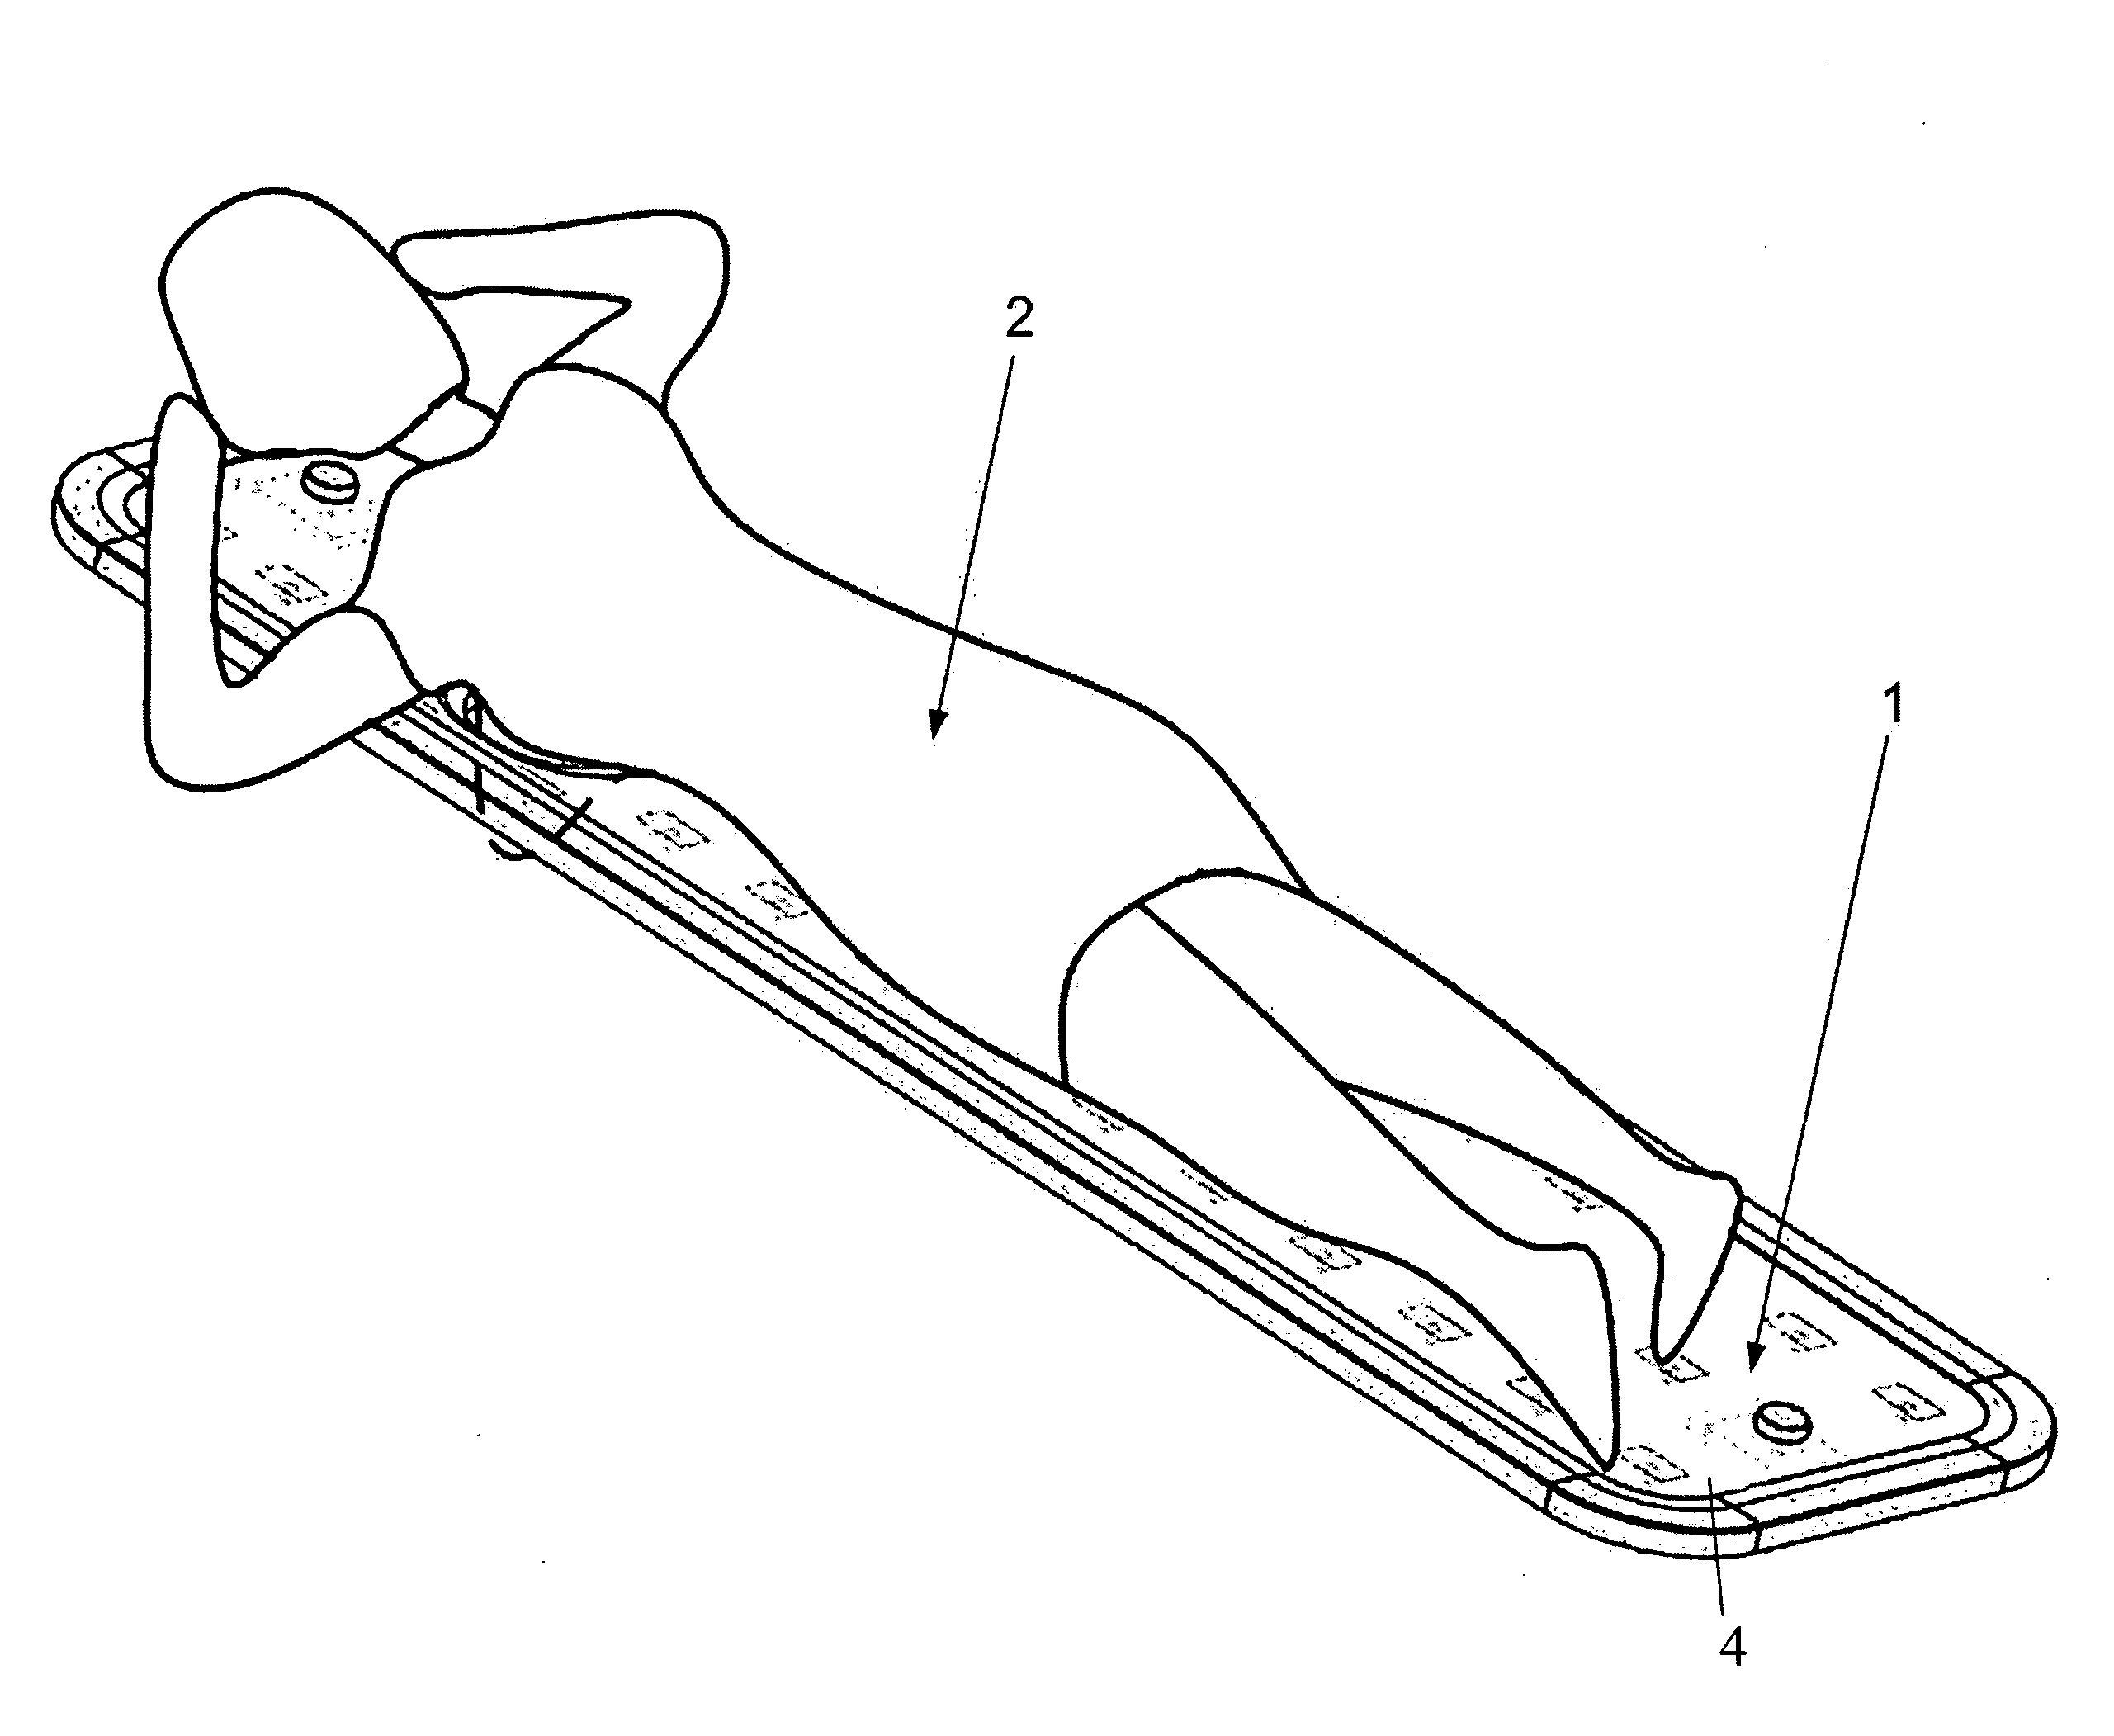 Method and device for positioning patients with breast cancer in prone position for imaging and radiotherapy